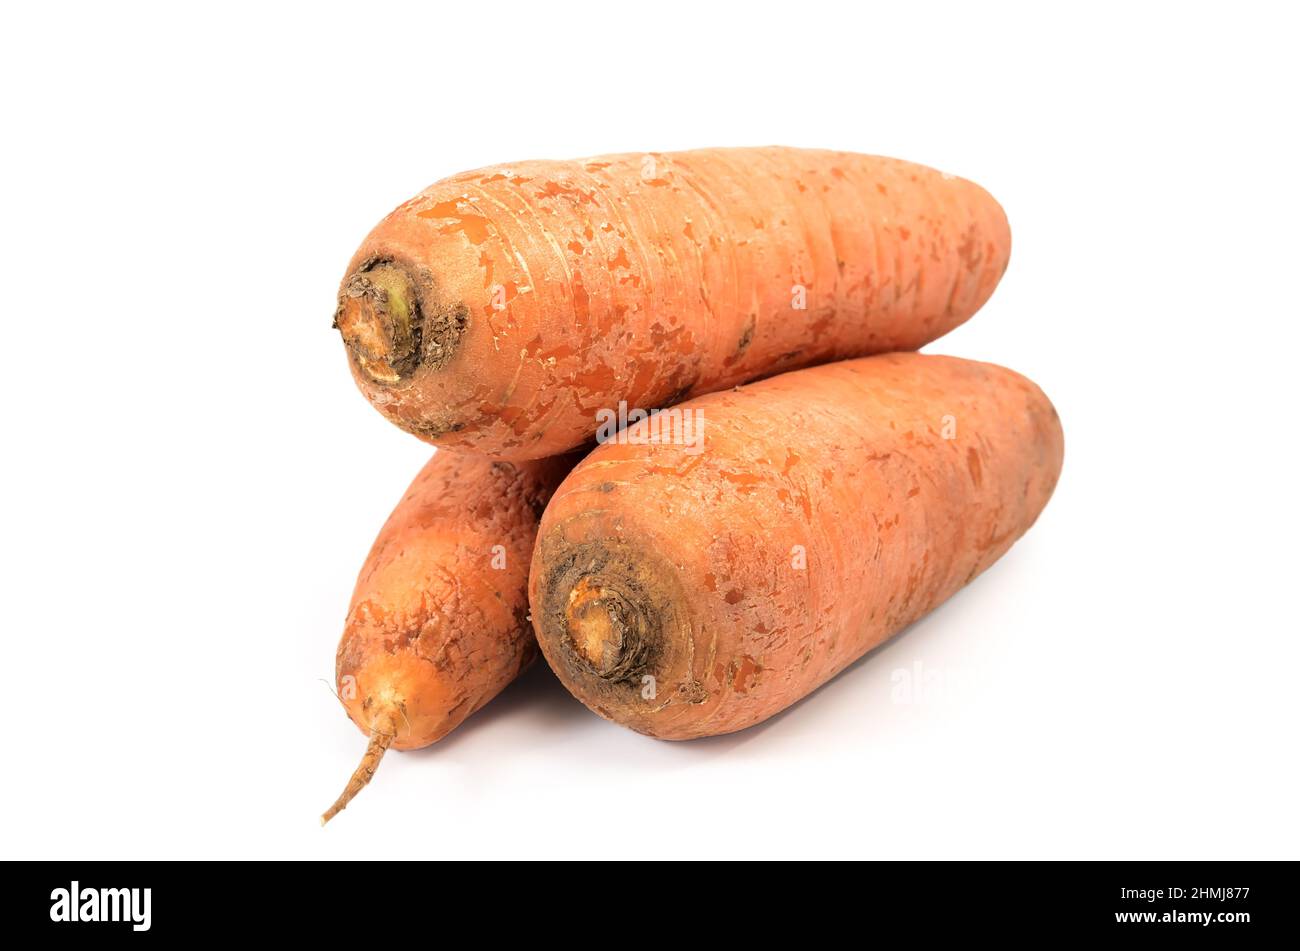 Ripe carrots on white background with soft shadow Stock Photo